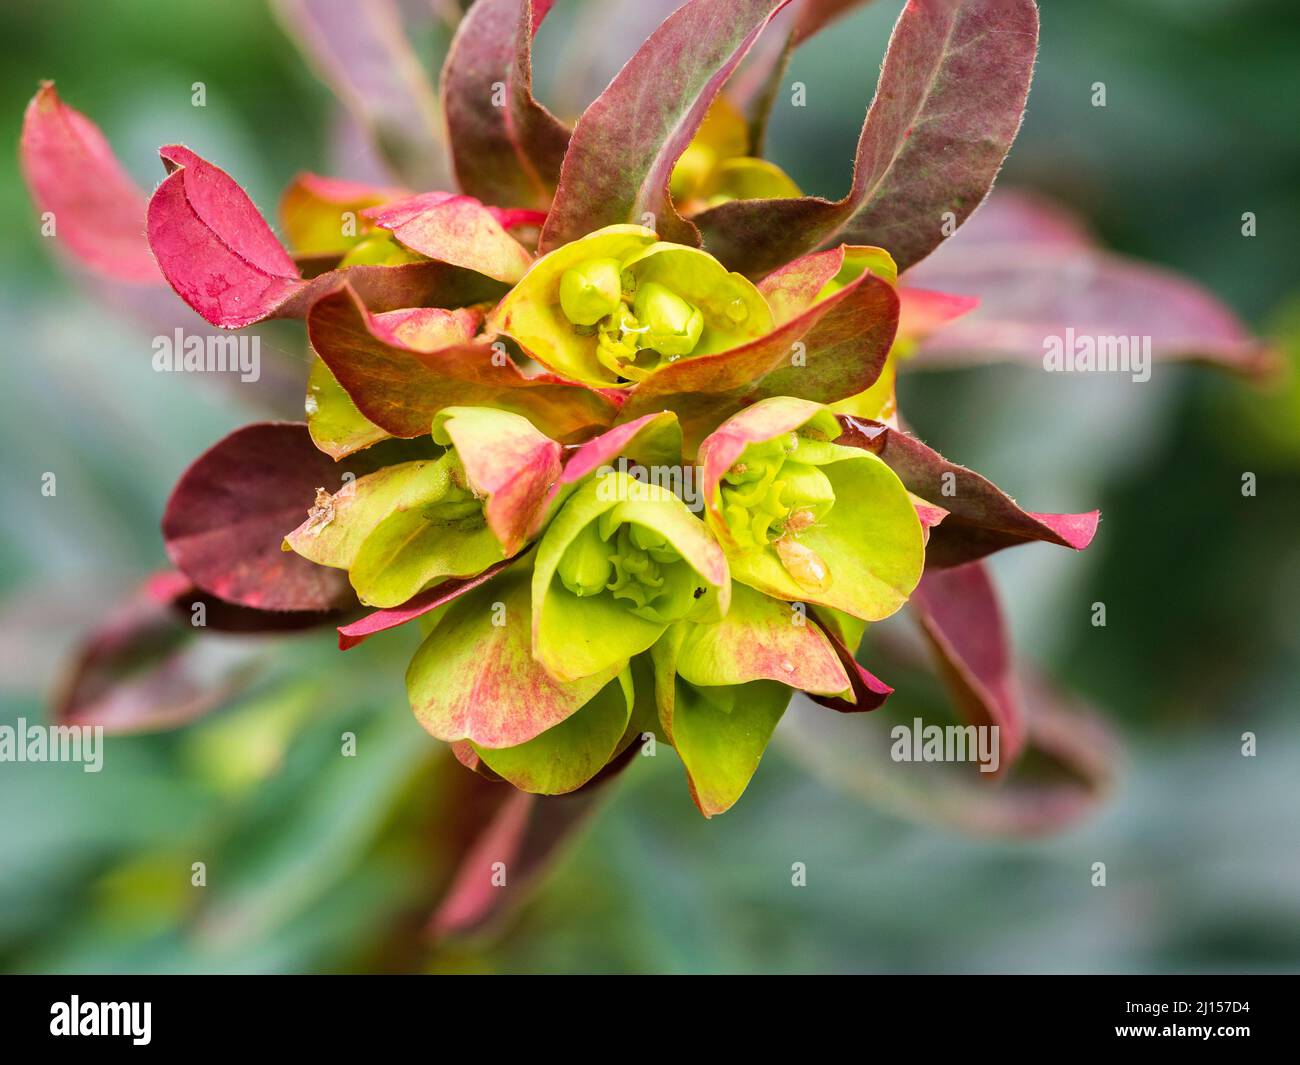 Dark leaves, red stems and acid yellow bracts of the selected form of the evergreen wood spurge, Euphorbia amygdaloides 'Purpurea' Stock Photo